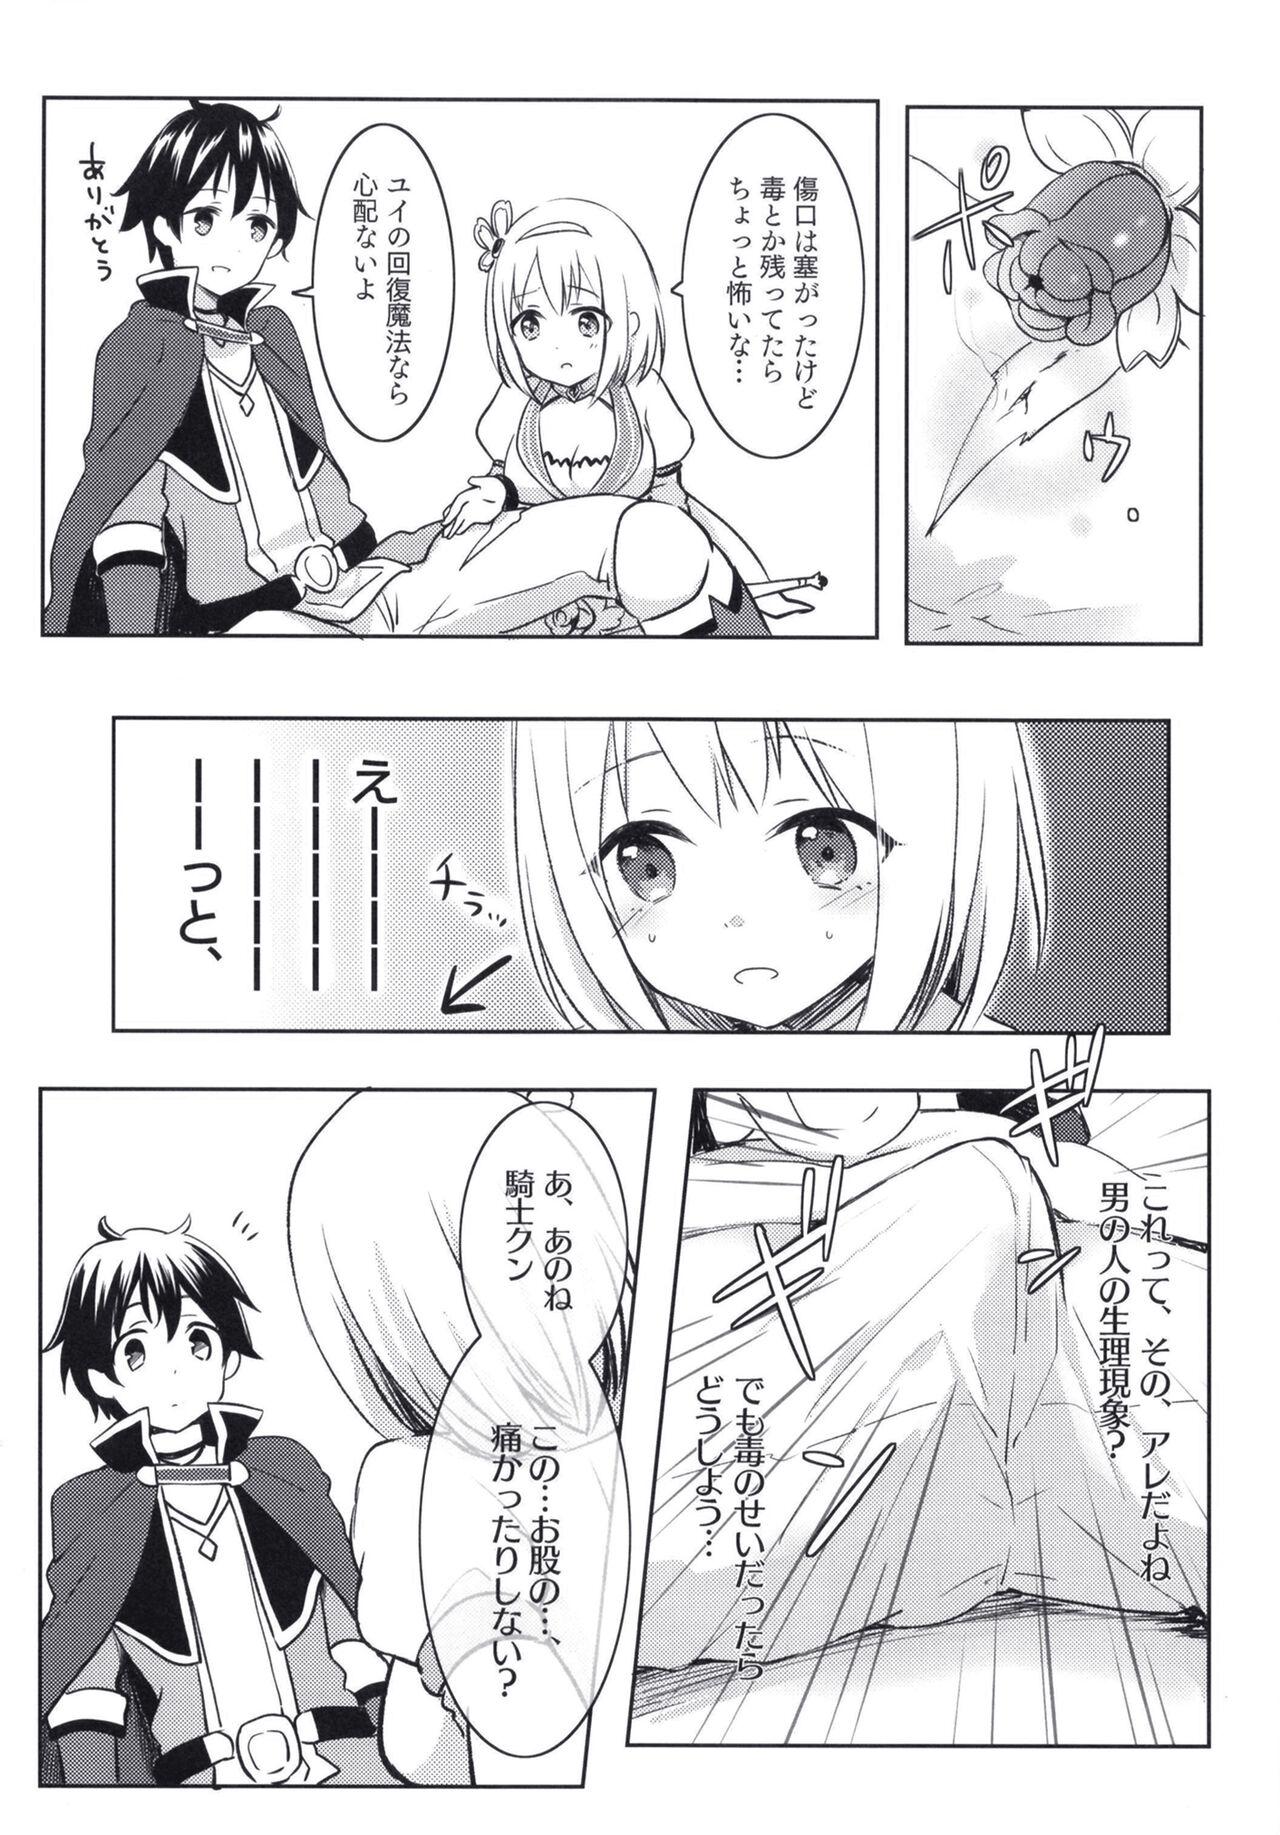 Married Yui to Icha Love True End!? - Princess connect Abg - Page 4